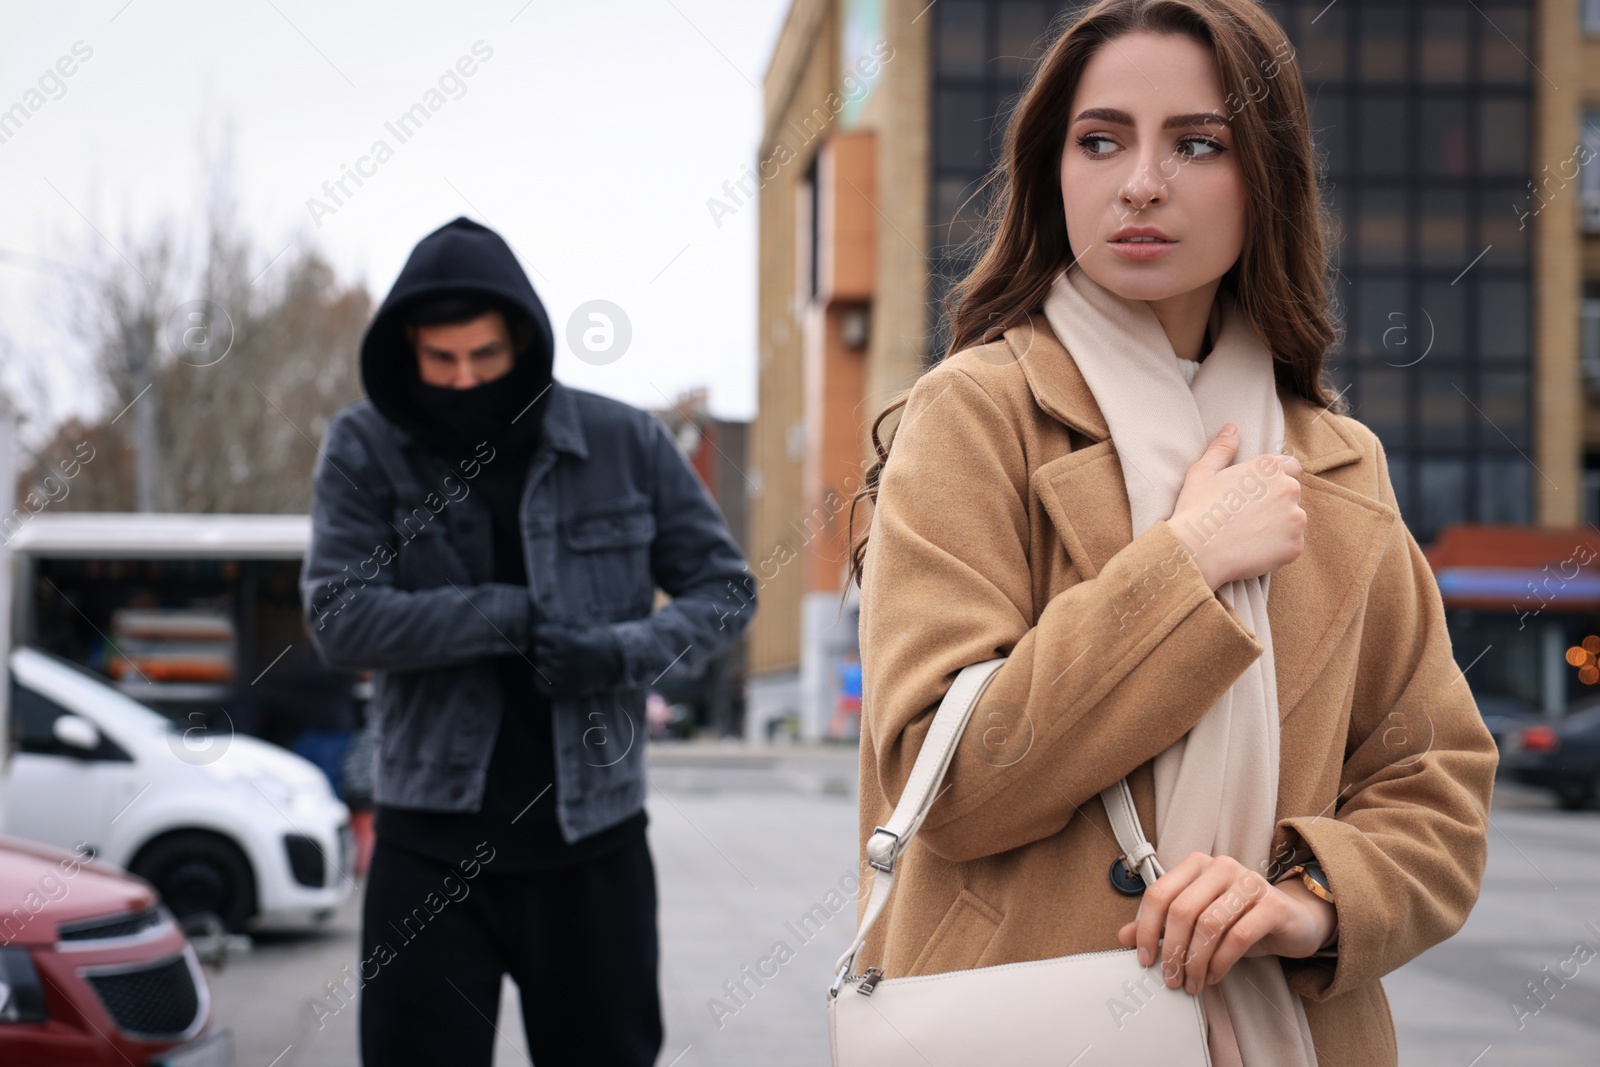 Photo of Man stalking young woman on city street